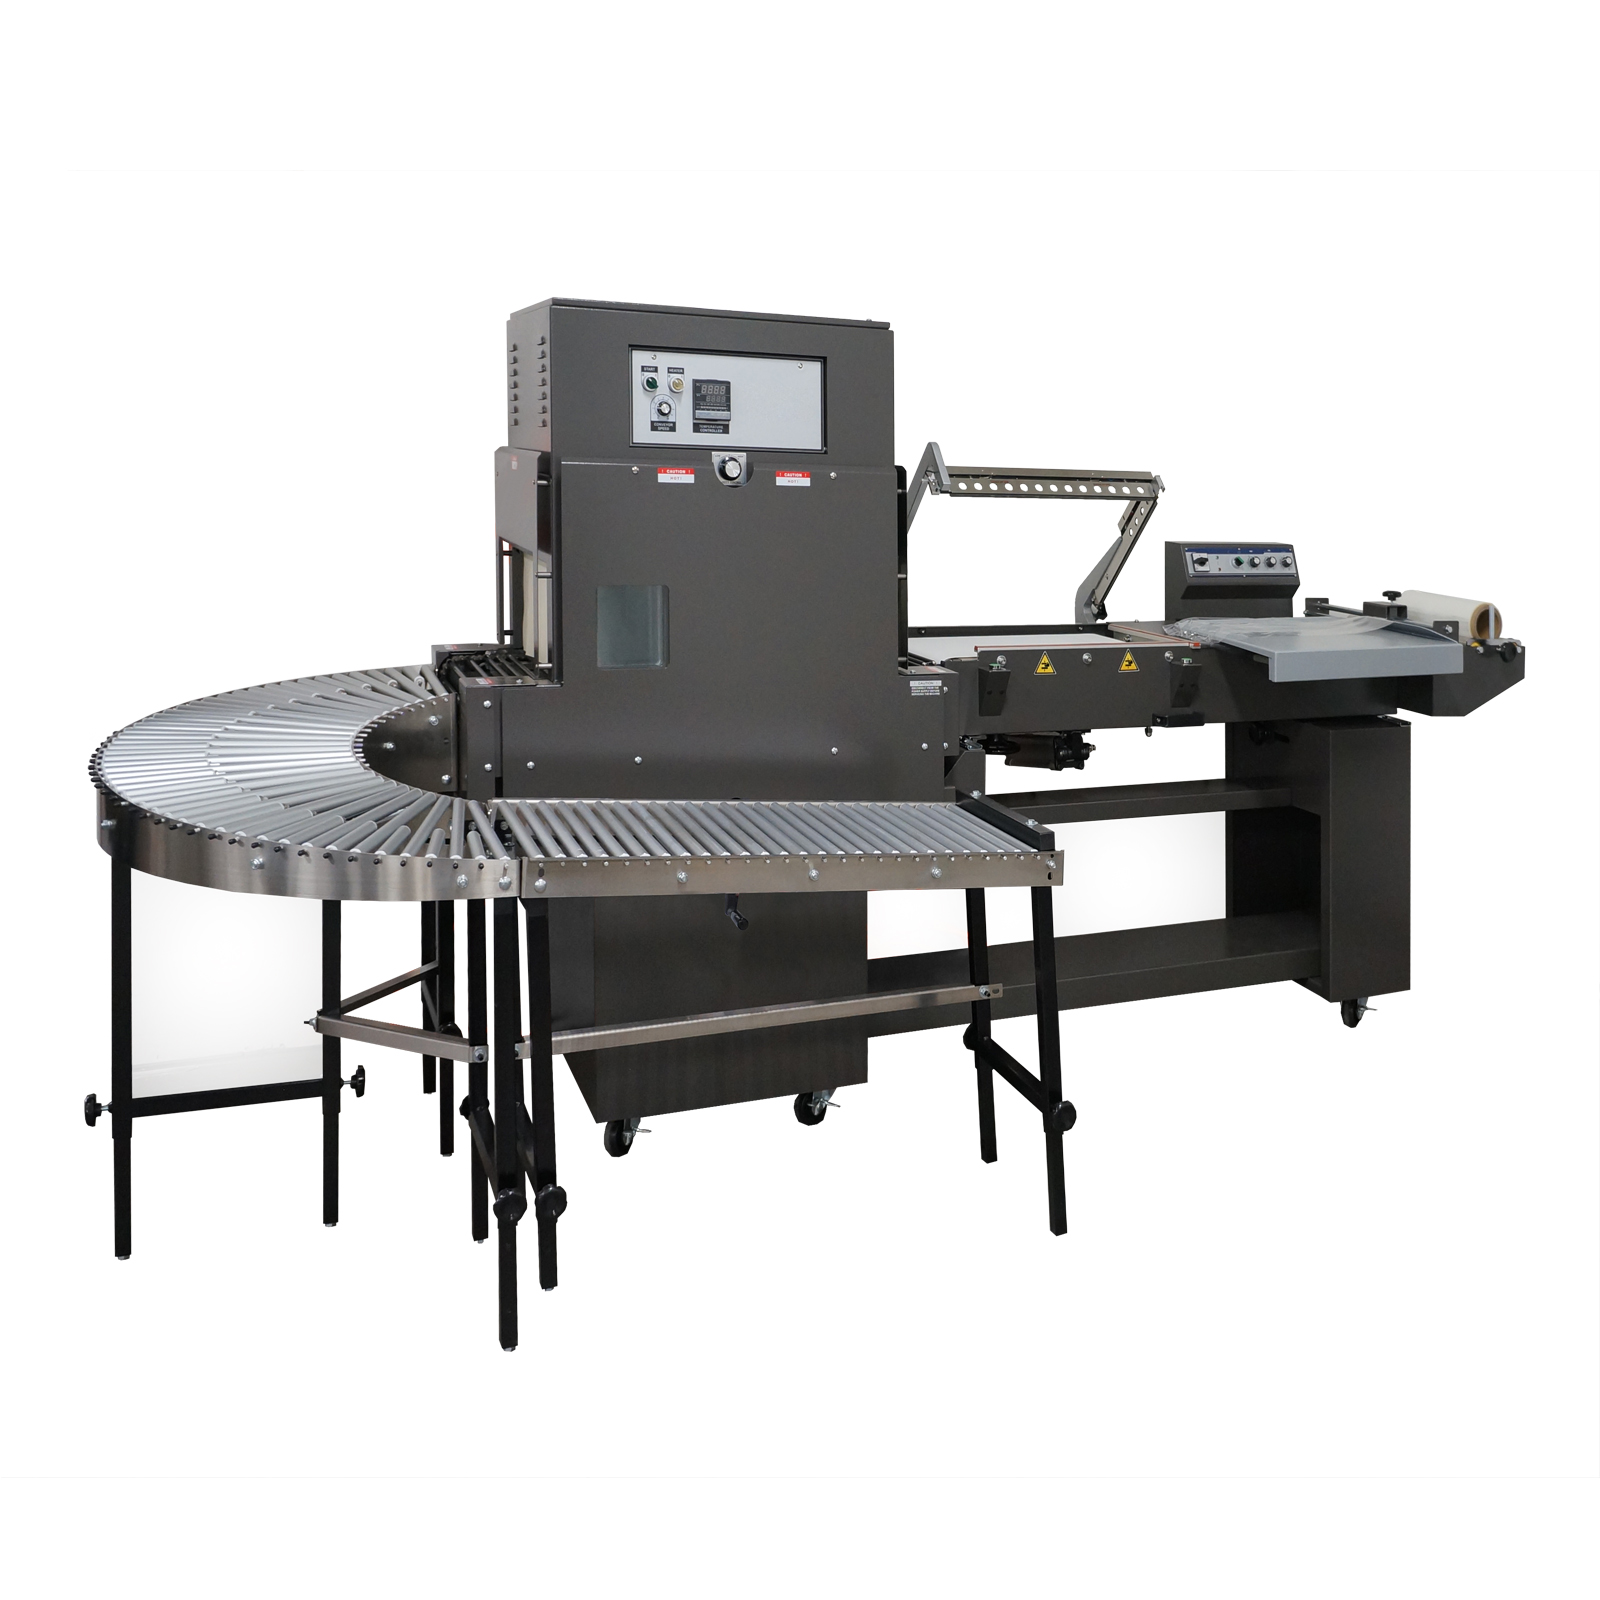 PP1622MK L-bar Sealer and semi-automatic shrink wrapper combo